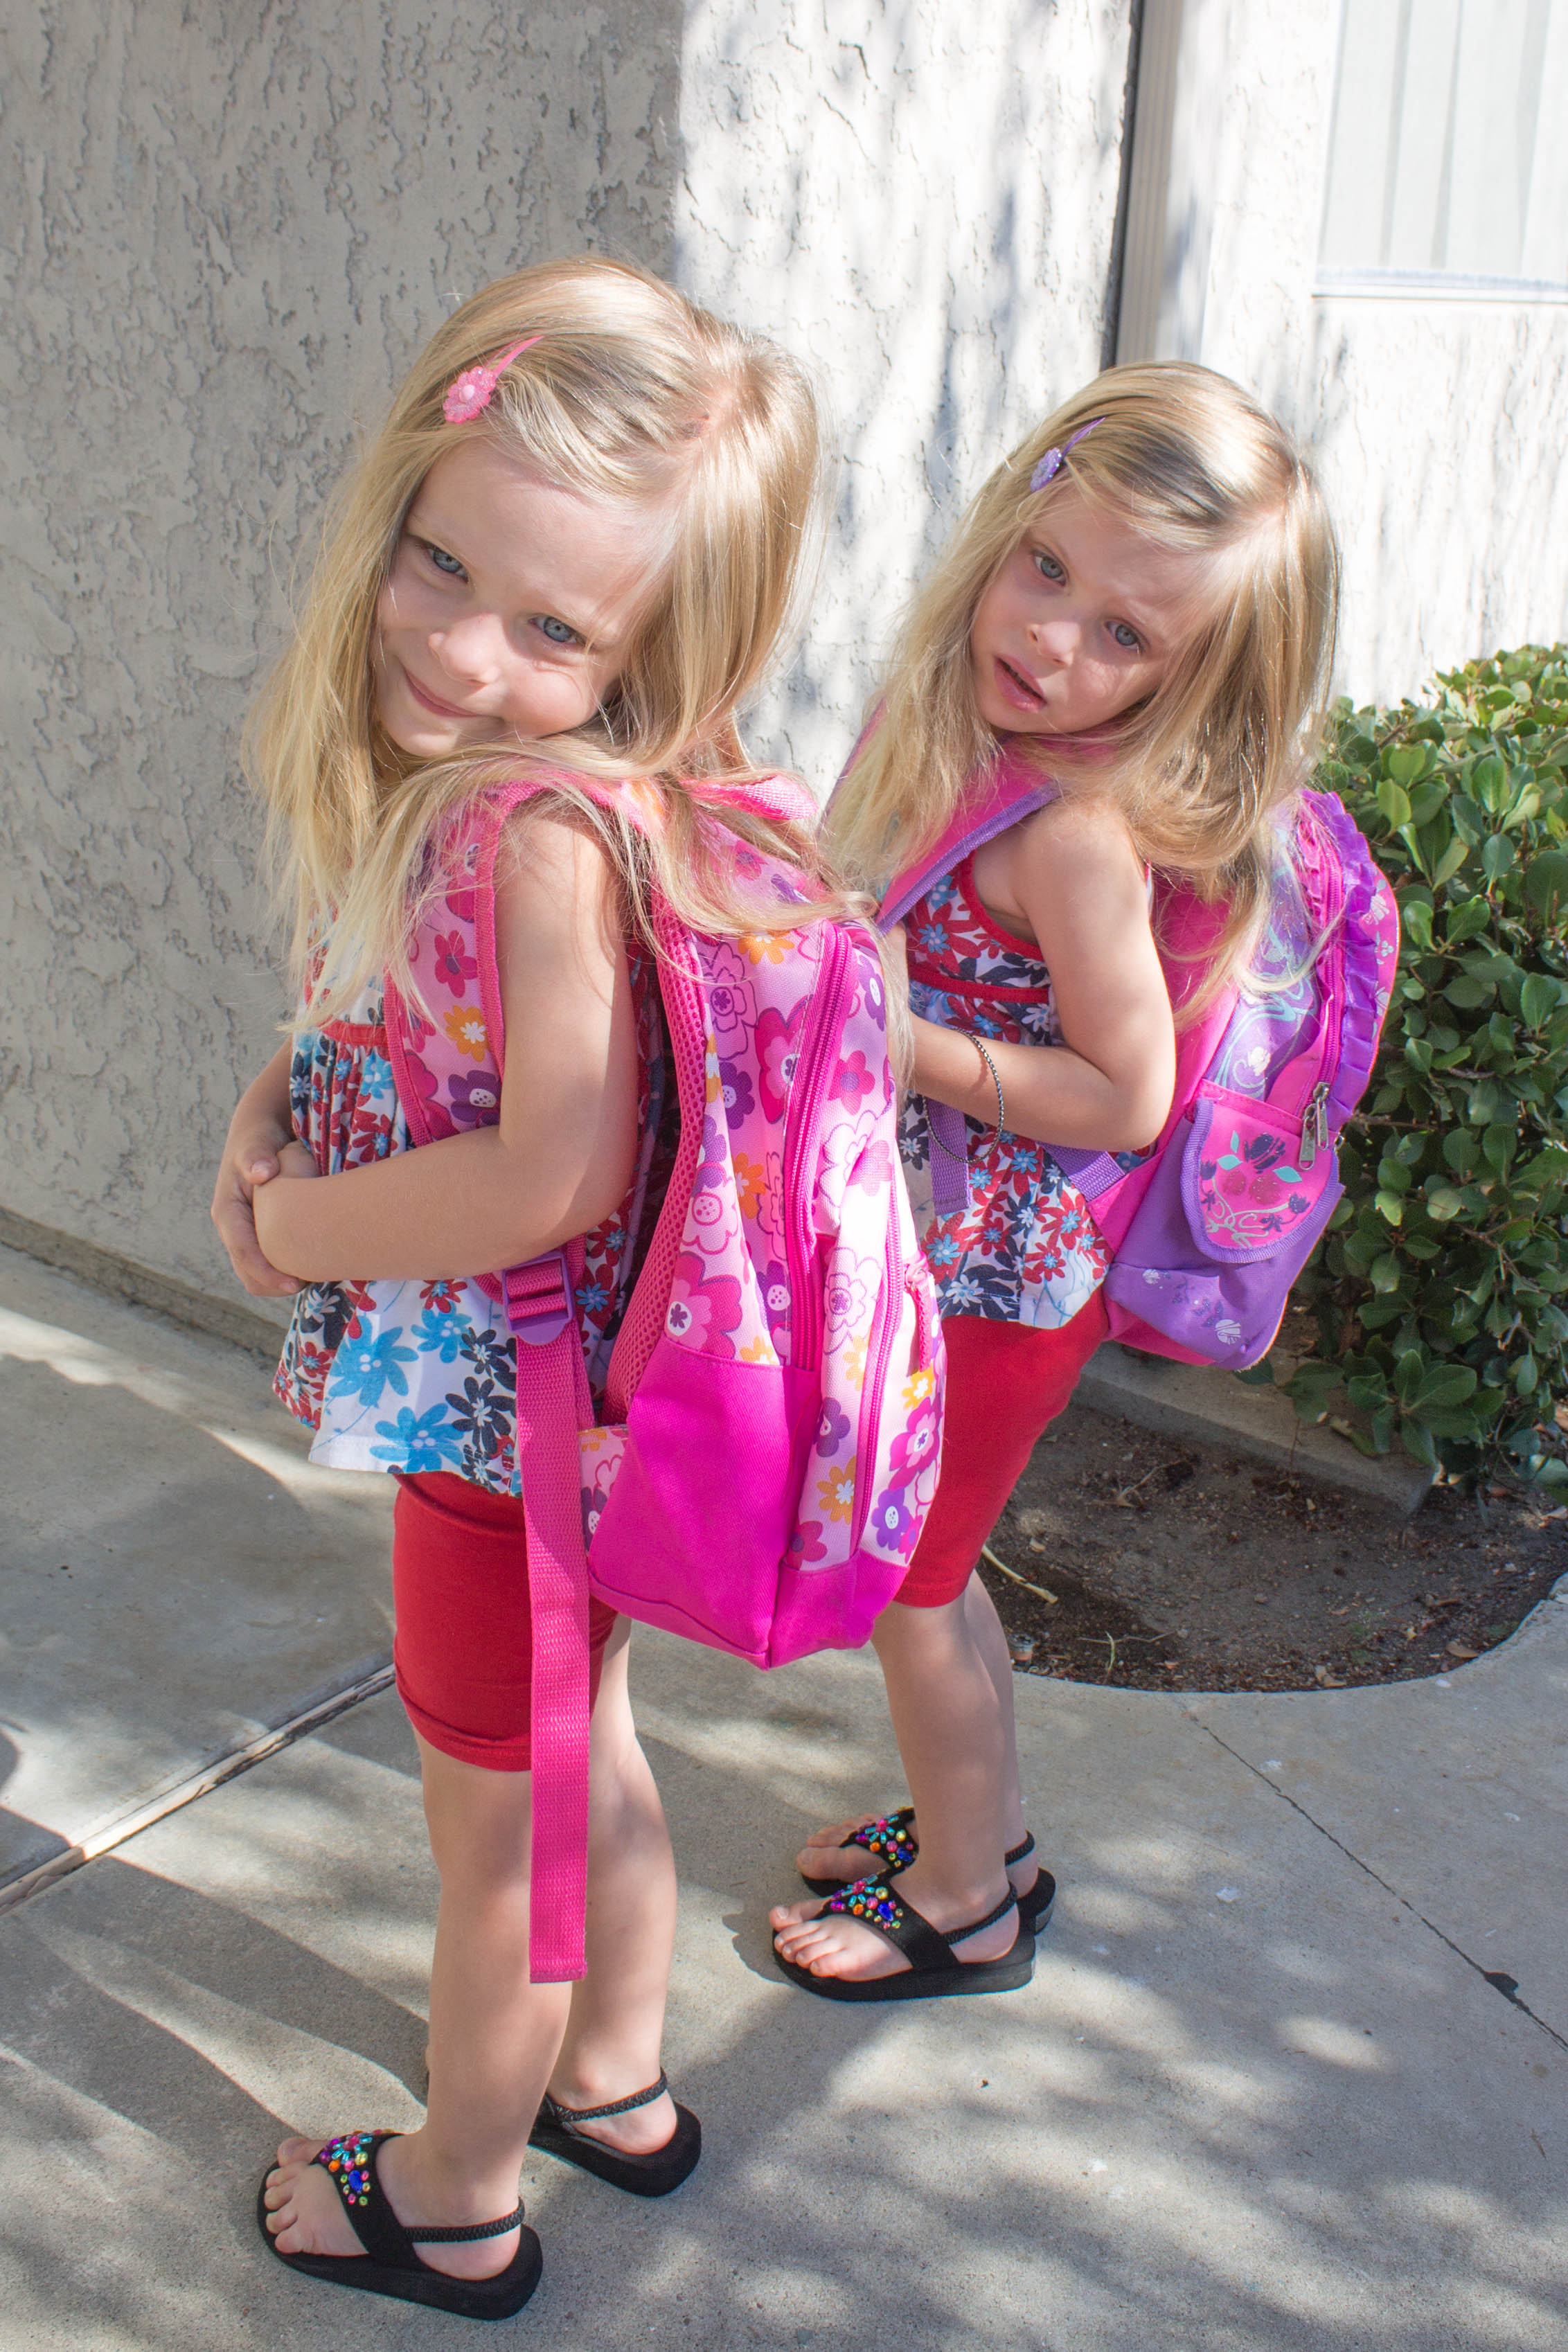 The twins still have 2 years until they start kindergarten. They wish they could go back to school with us though!